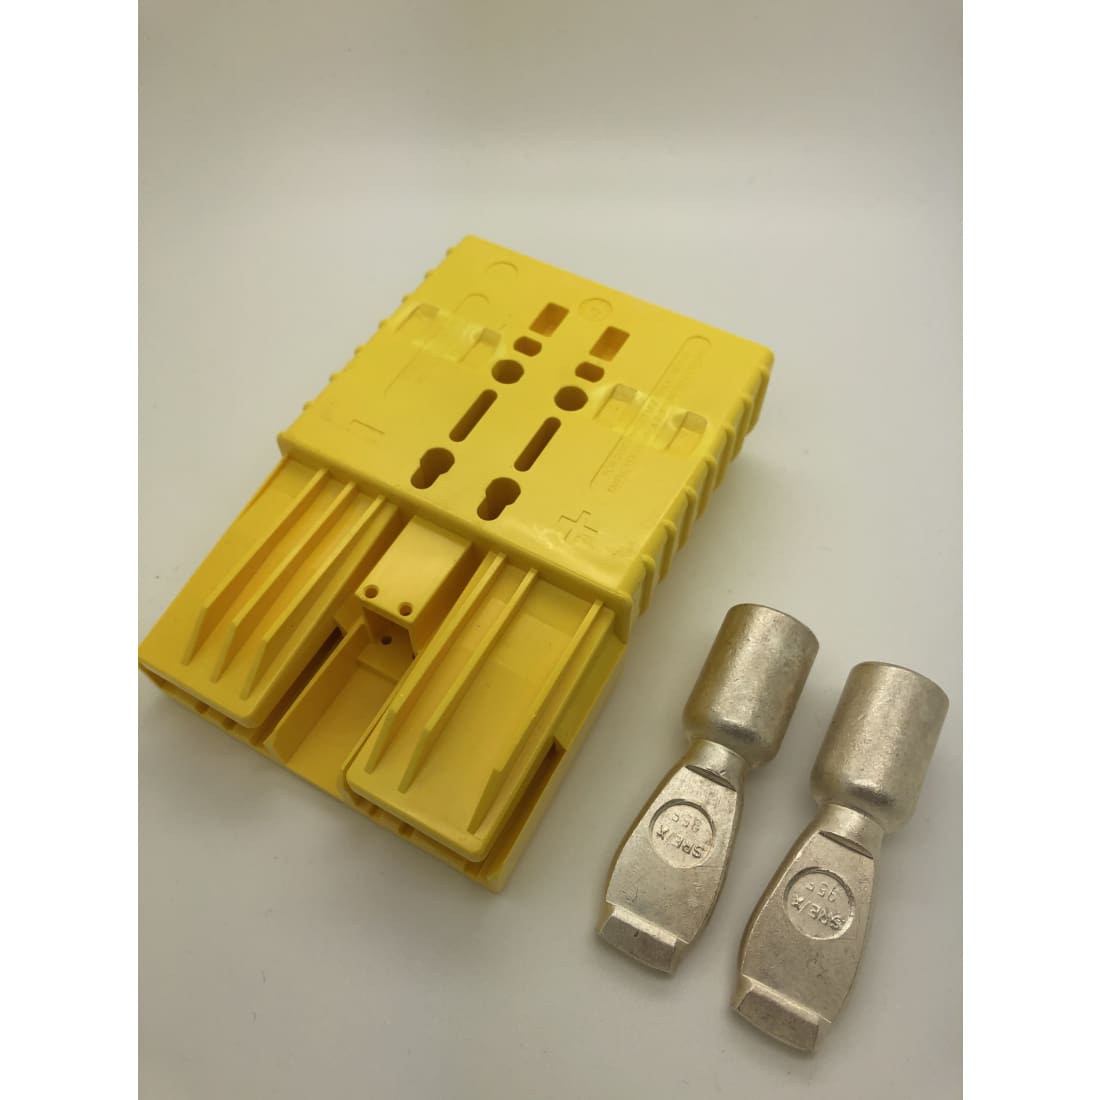 REMA SRE 320 Connector including contacts - 95mm2 / Yellow - Battery Connector